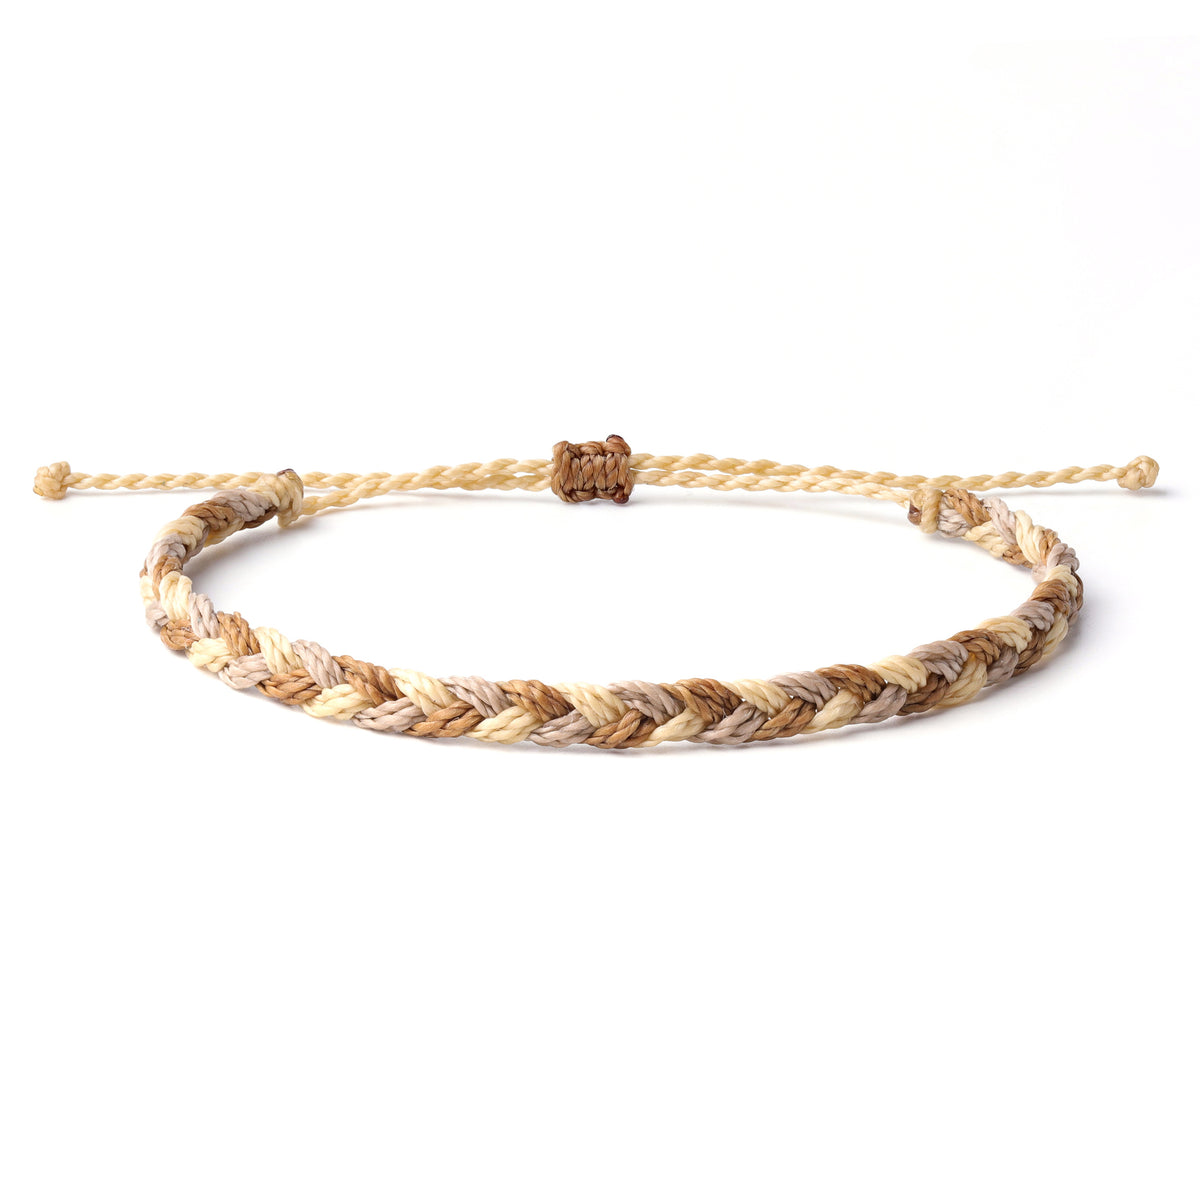 Braided Waterproof Bracelet with wax coated thread and colors beige, brown and off-white